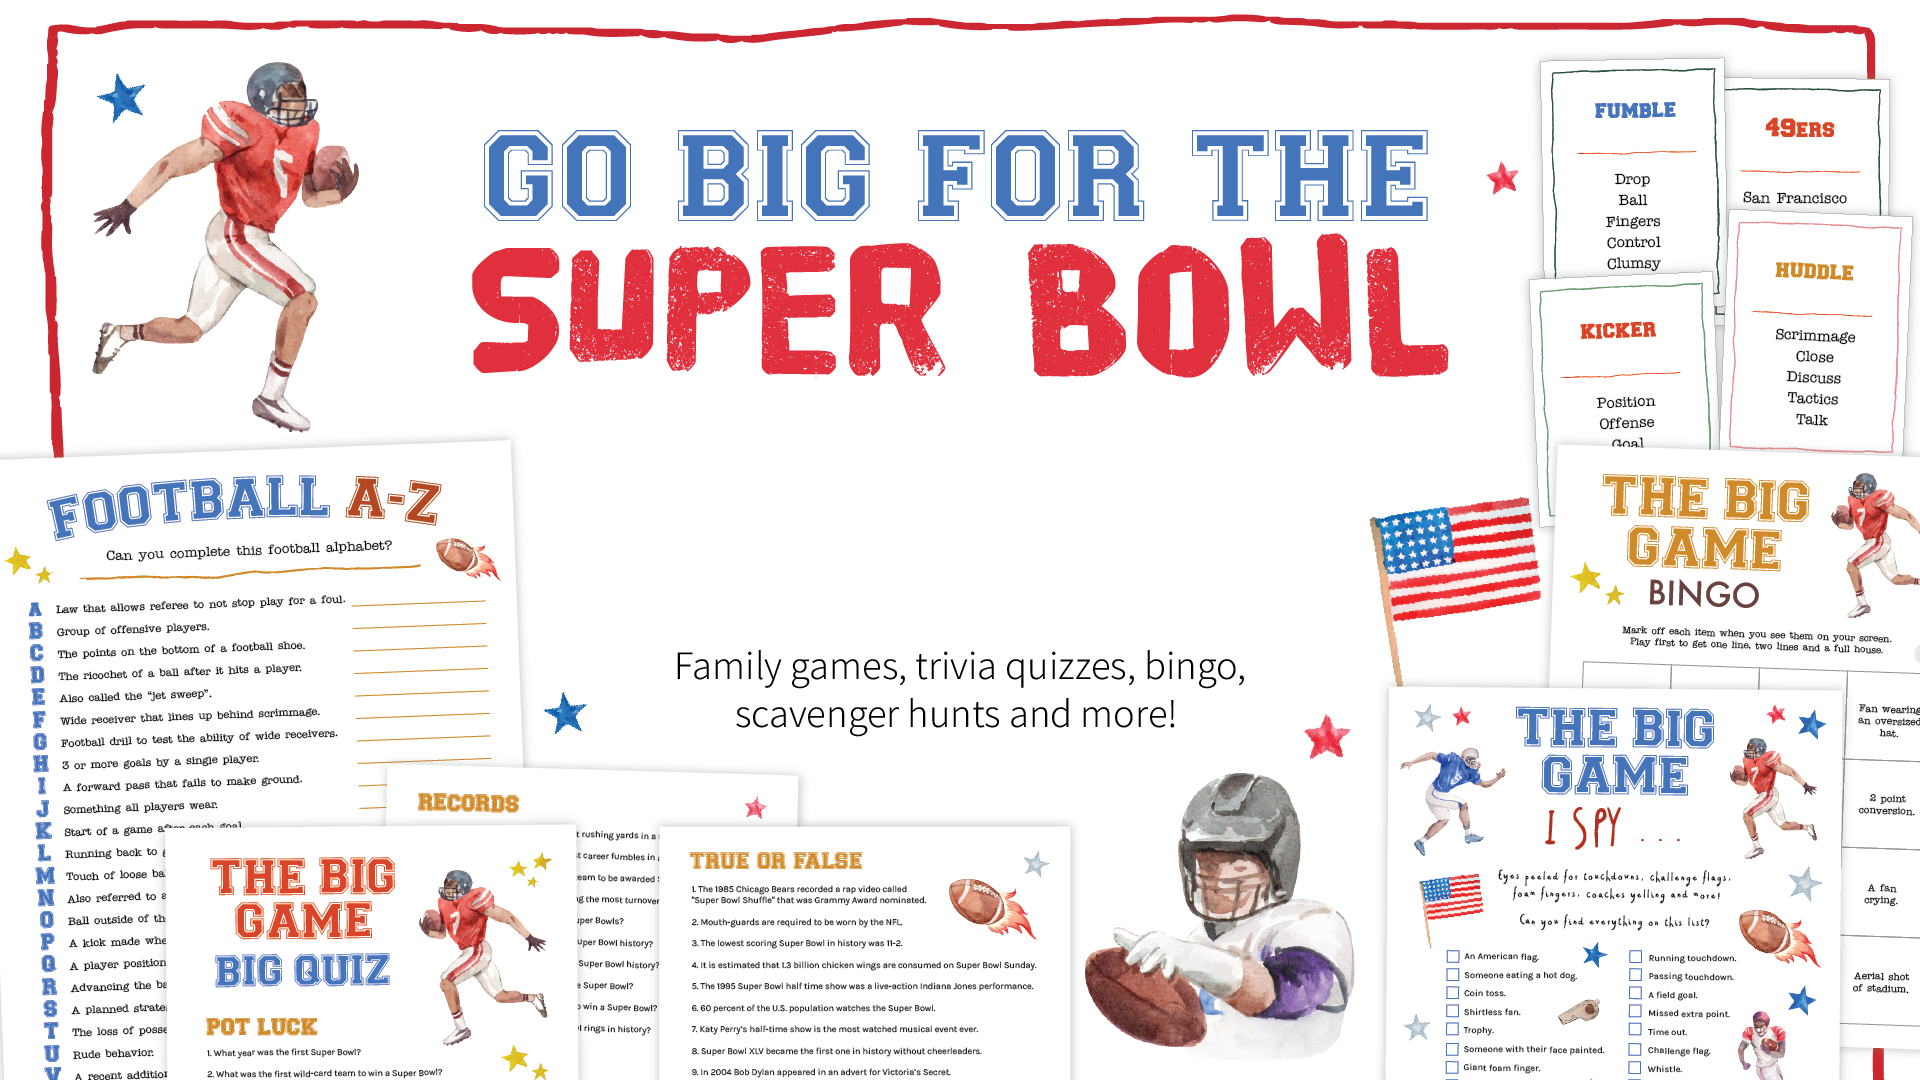 This Super Bowl entertains guests and children with some fun games - from 'The Big Game' Bingo, Football Family Feud, Super Bowl Trivia Quiz, I Spy and scavenger hunts.